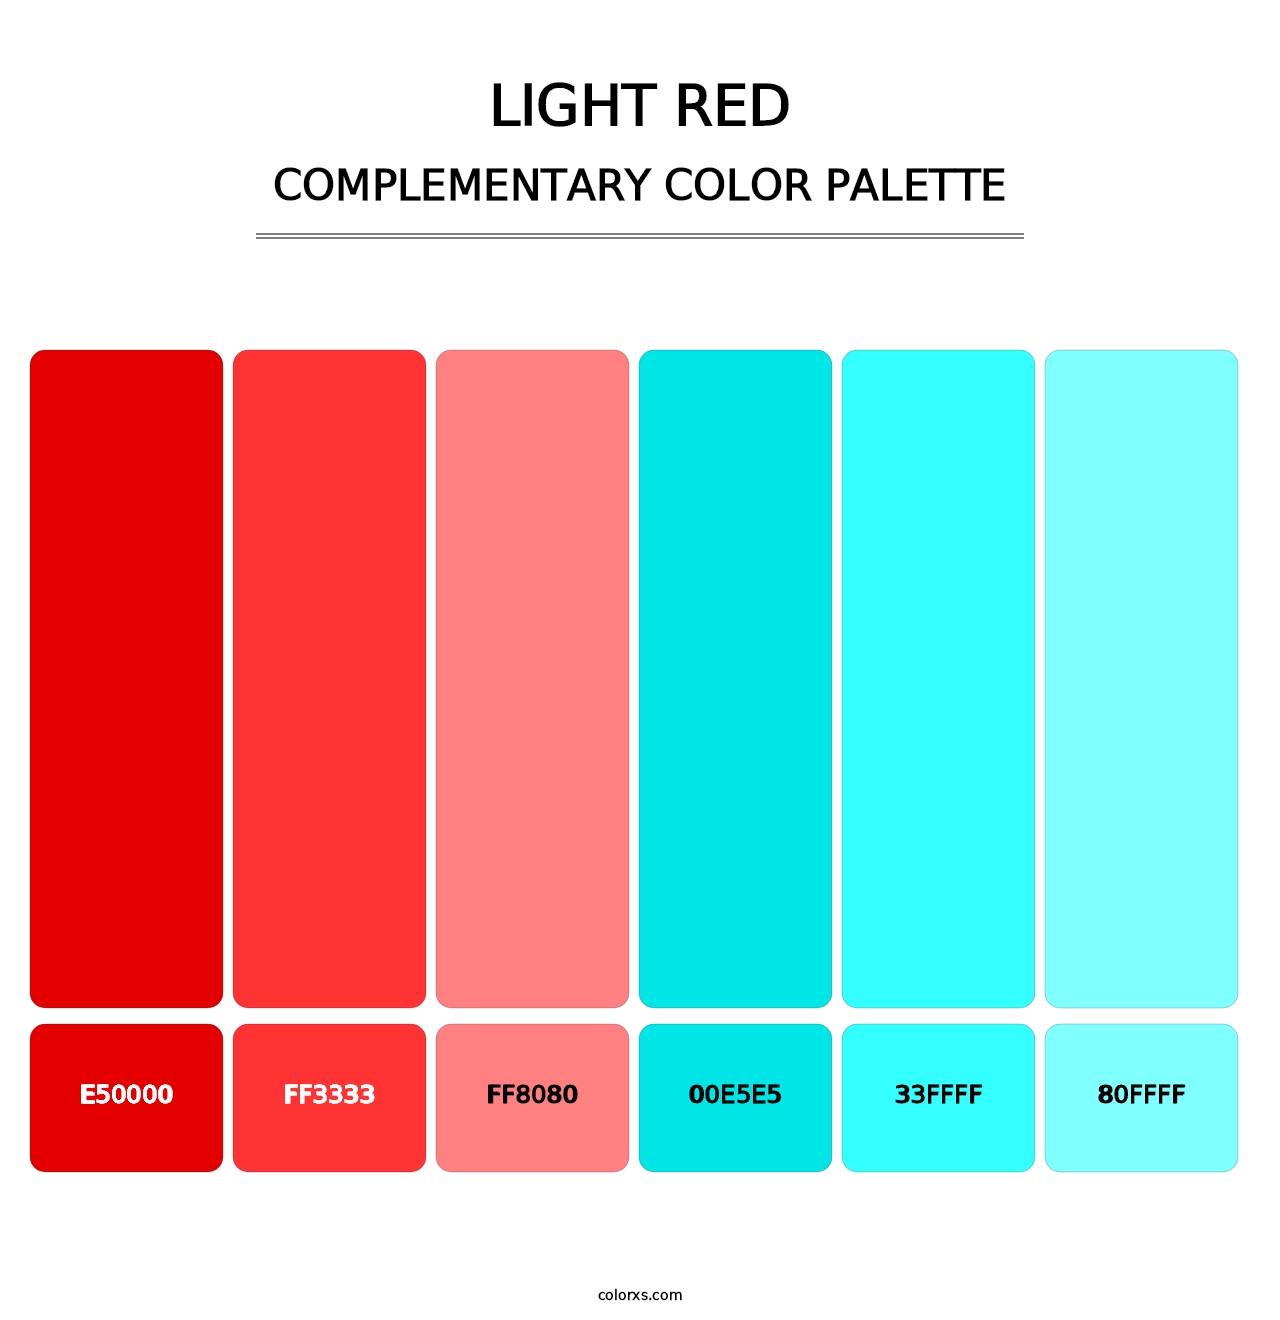 Light Red - Complementary Color Palette